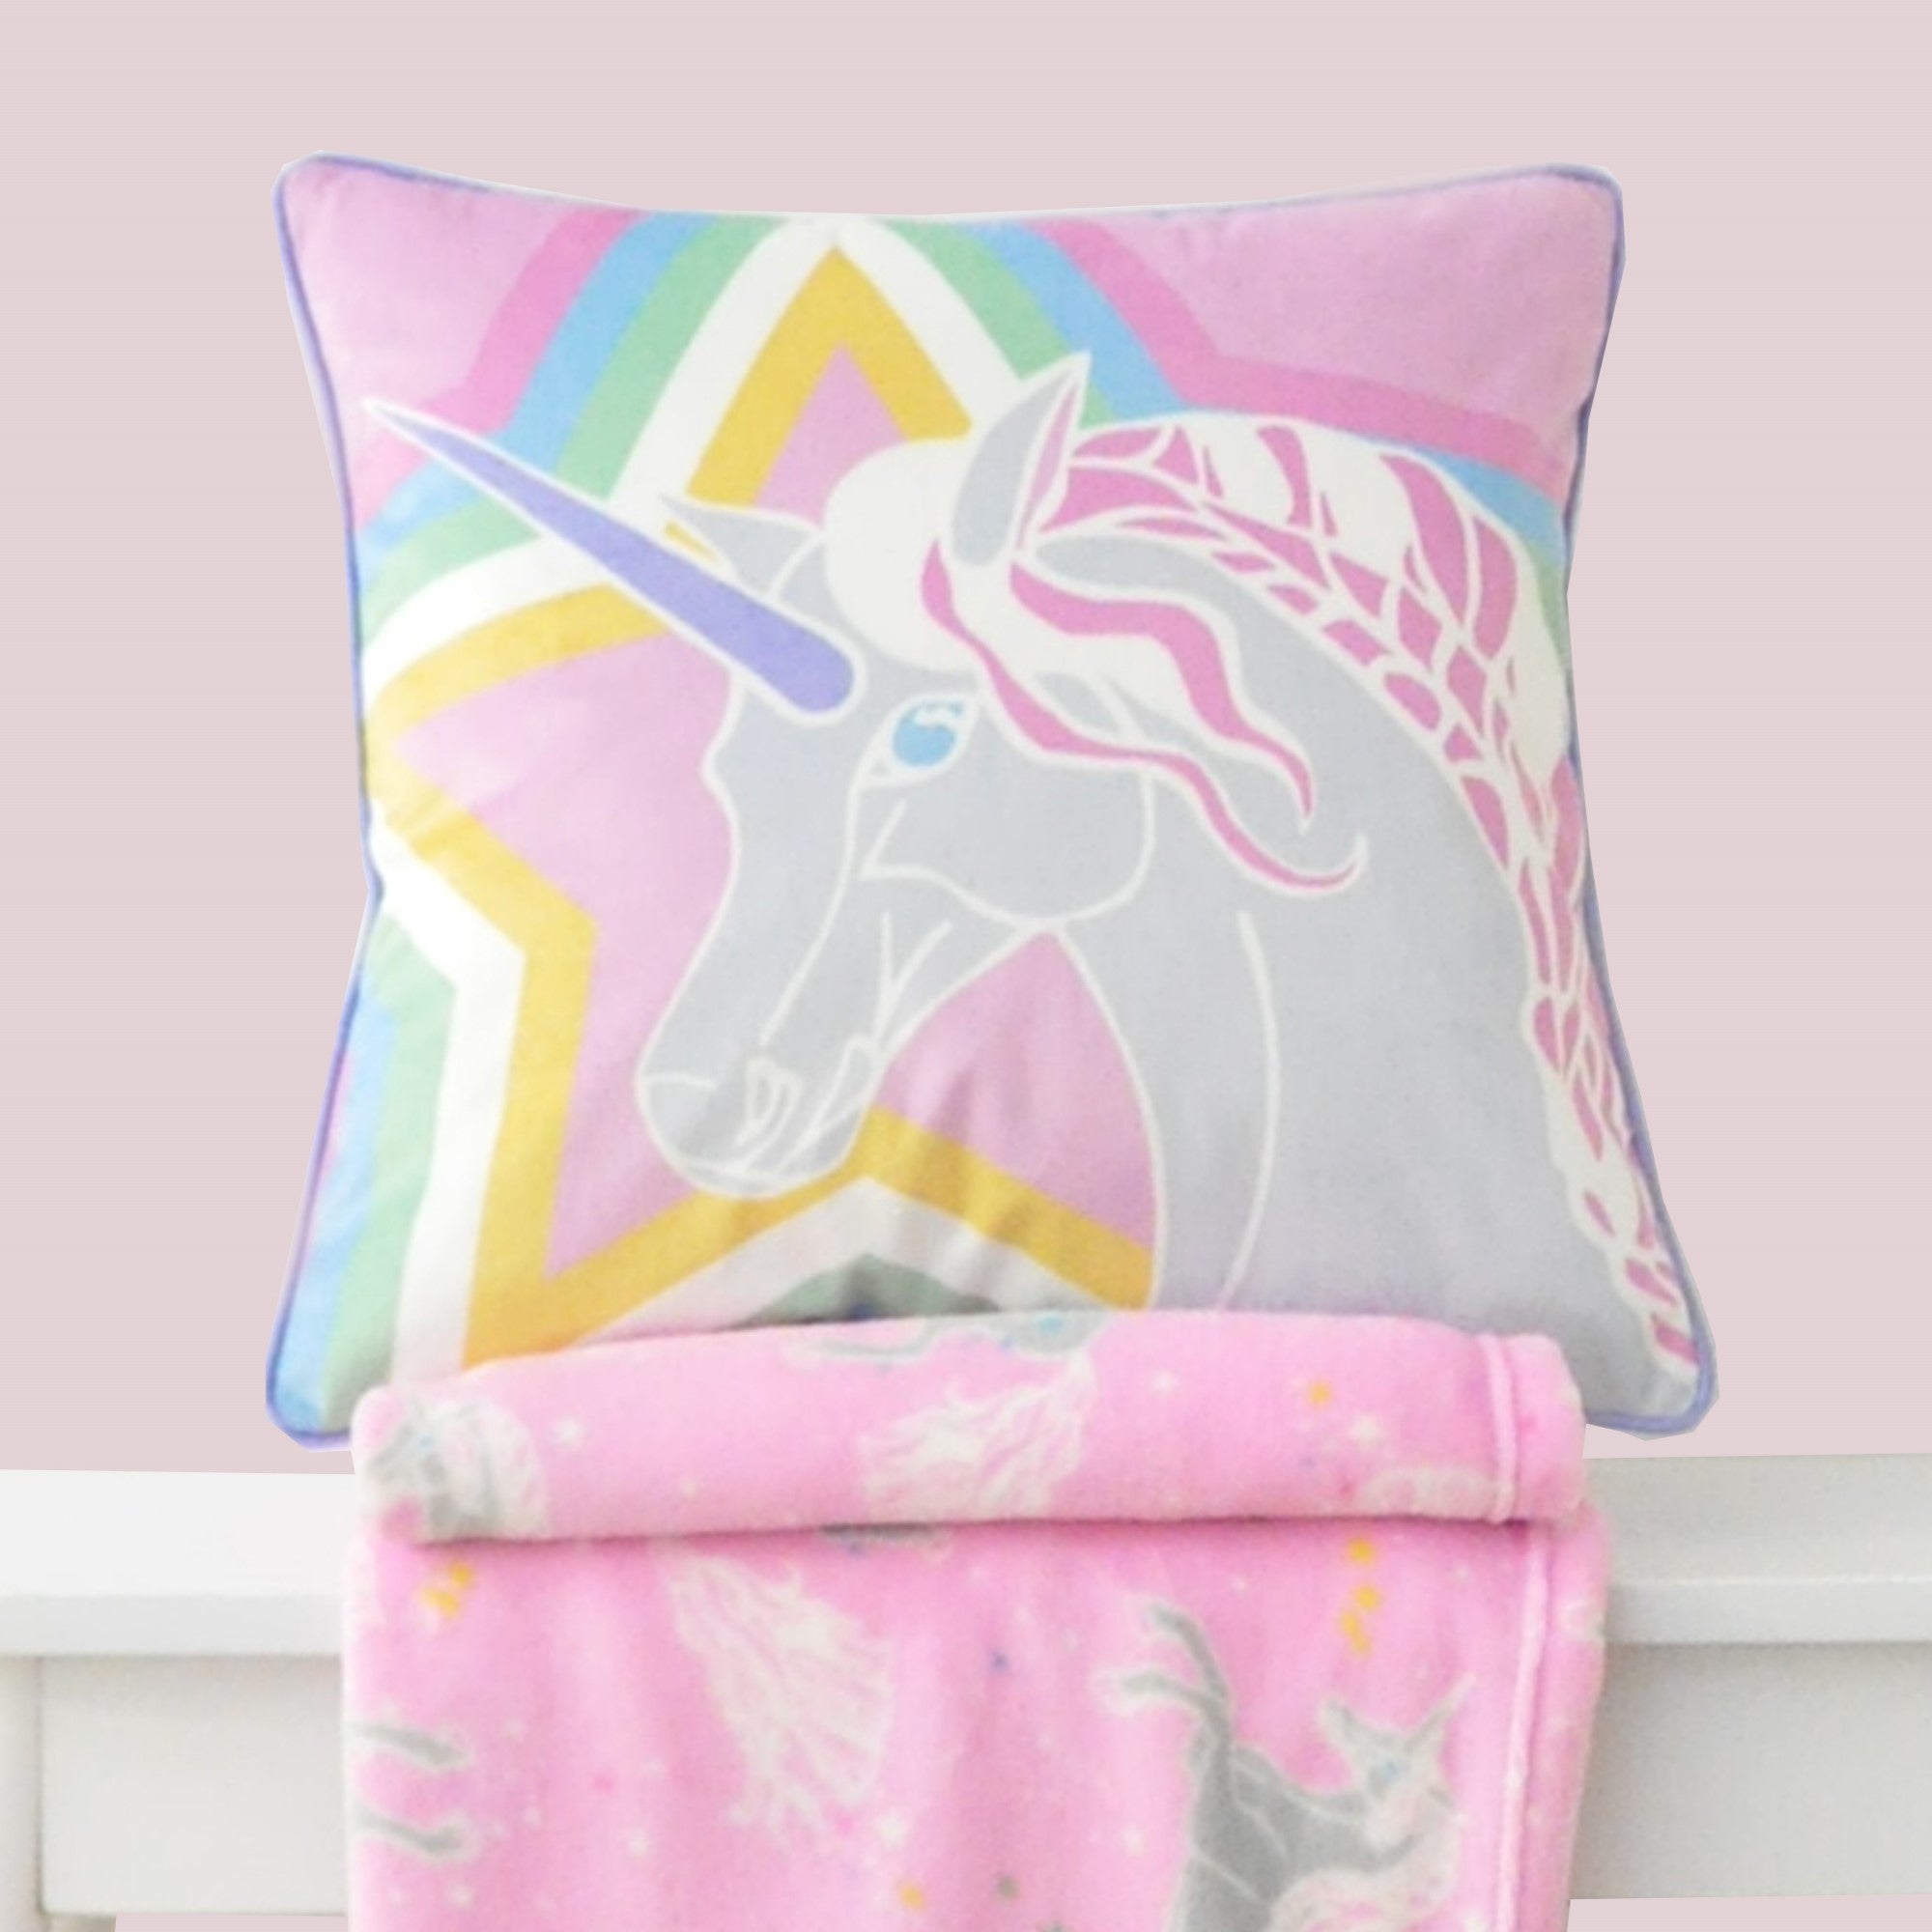 Cushion Cover Unicorn by Bedlam in Pink